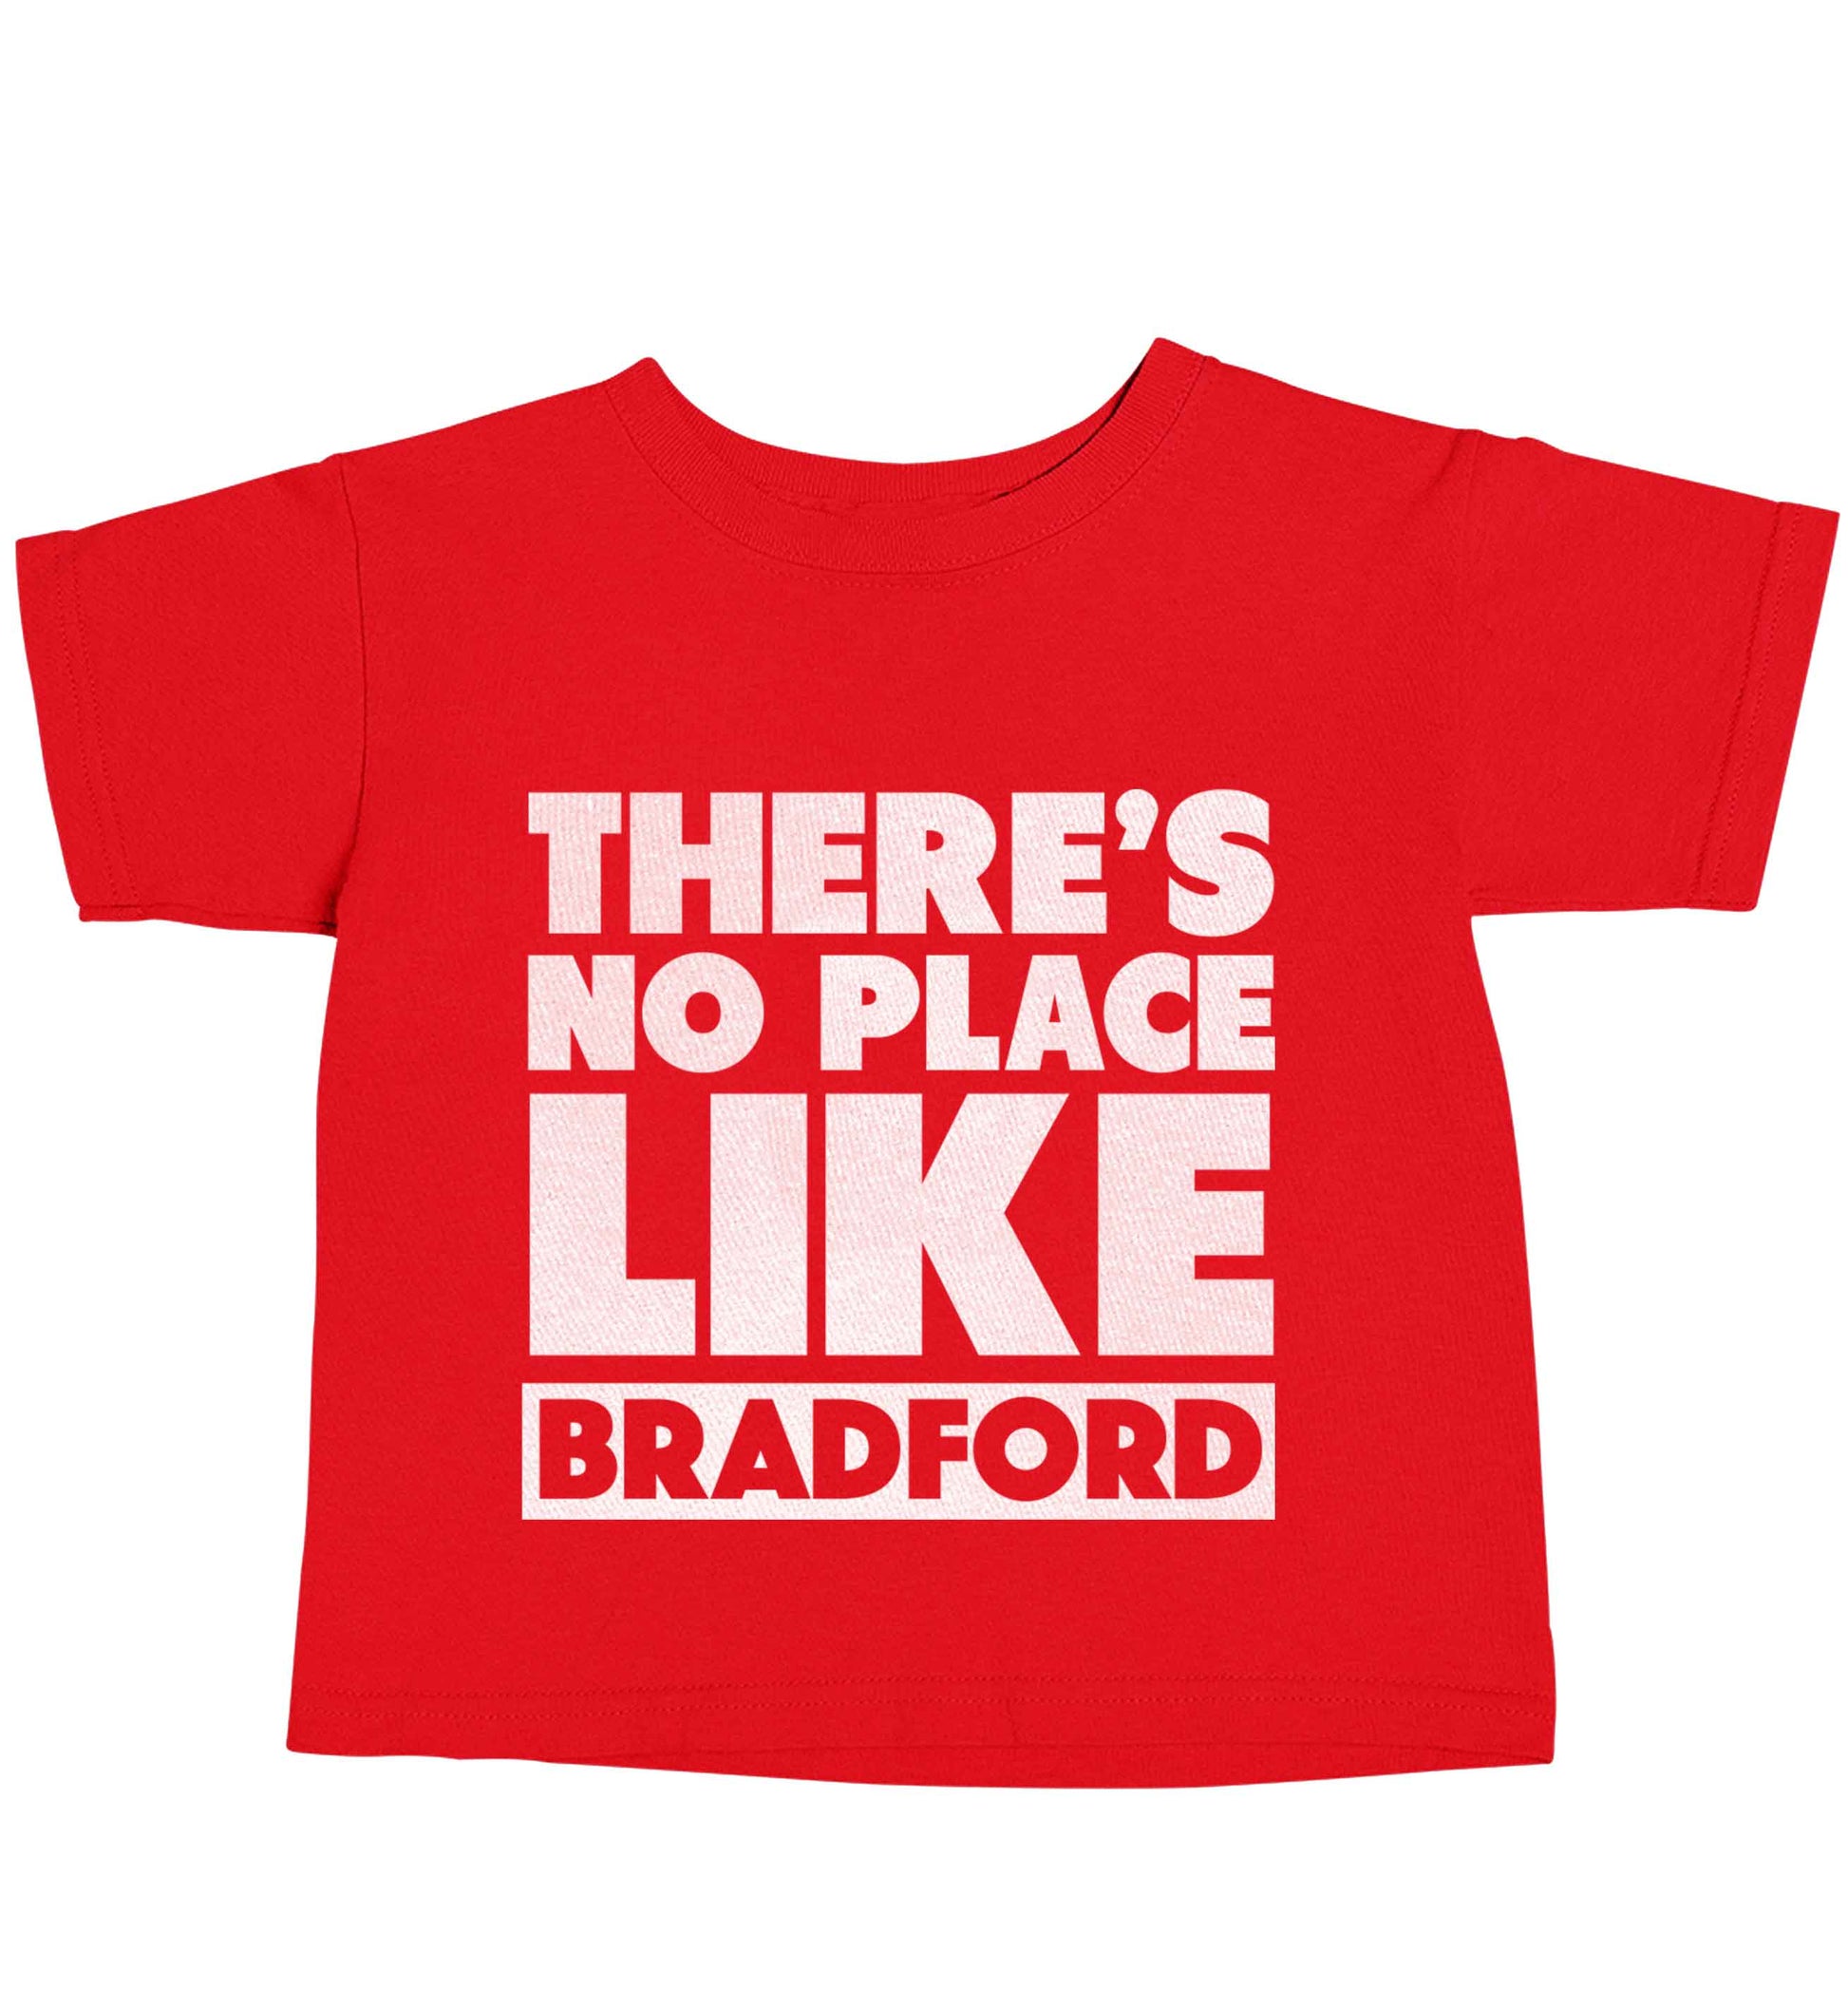 There's no place like Bradford red baby toddler Tshirt 2 Years